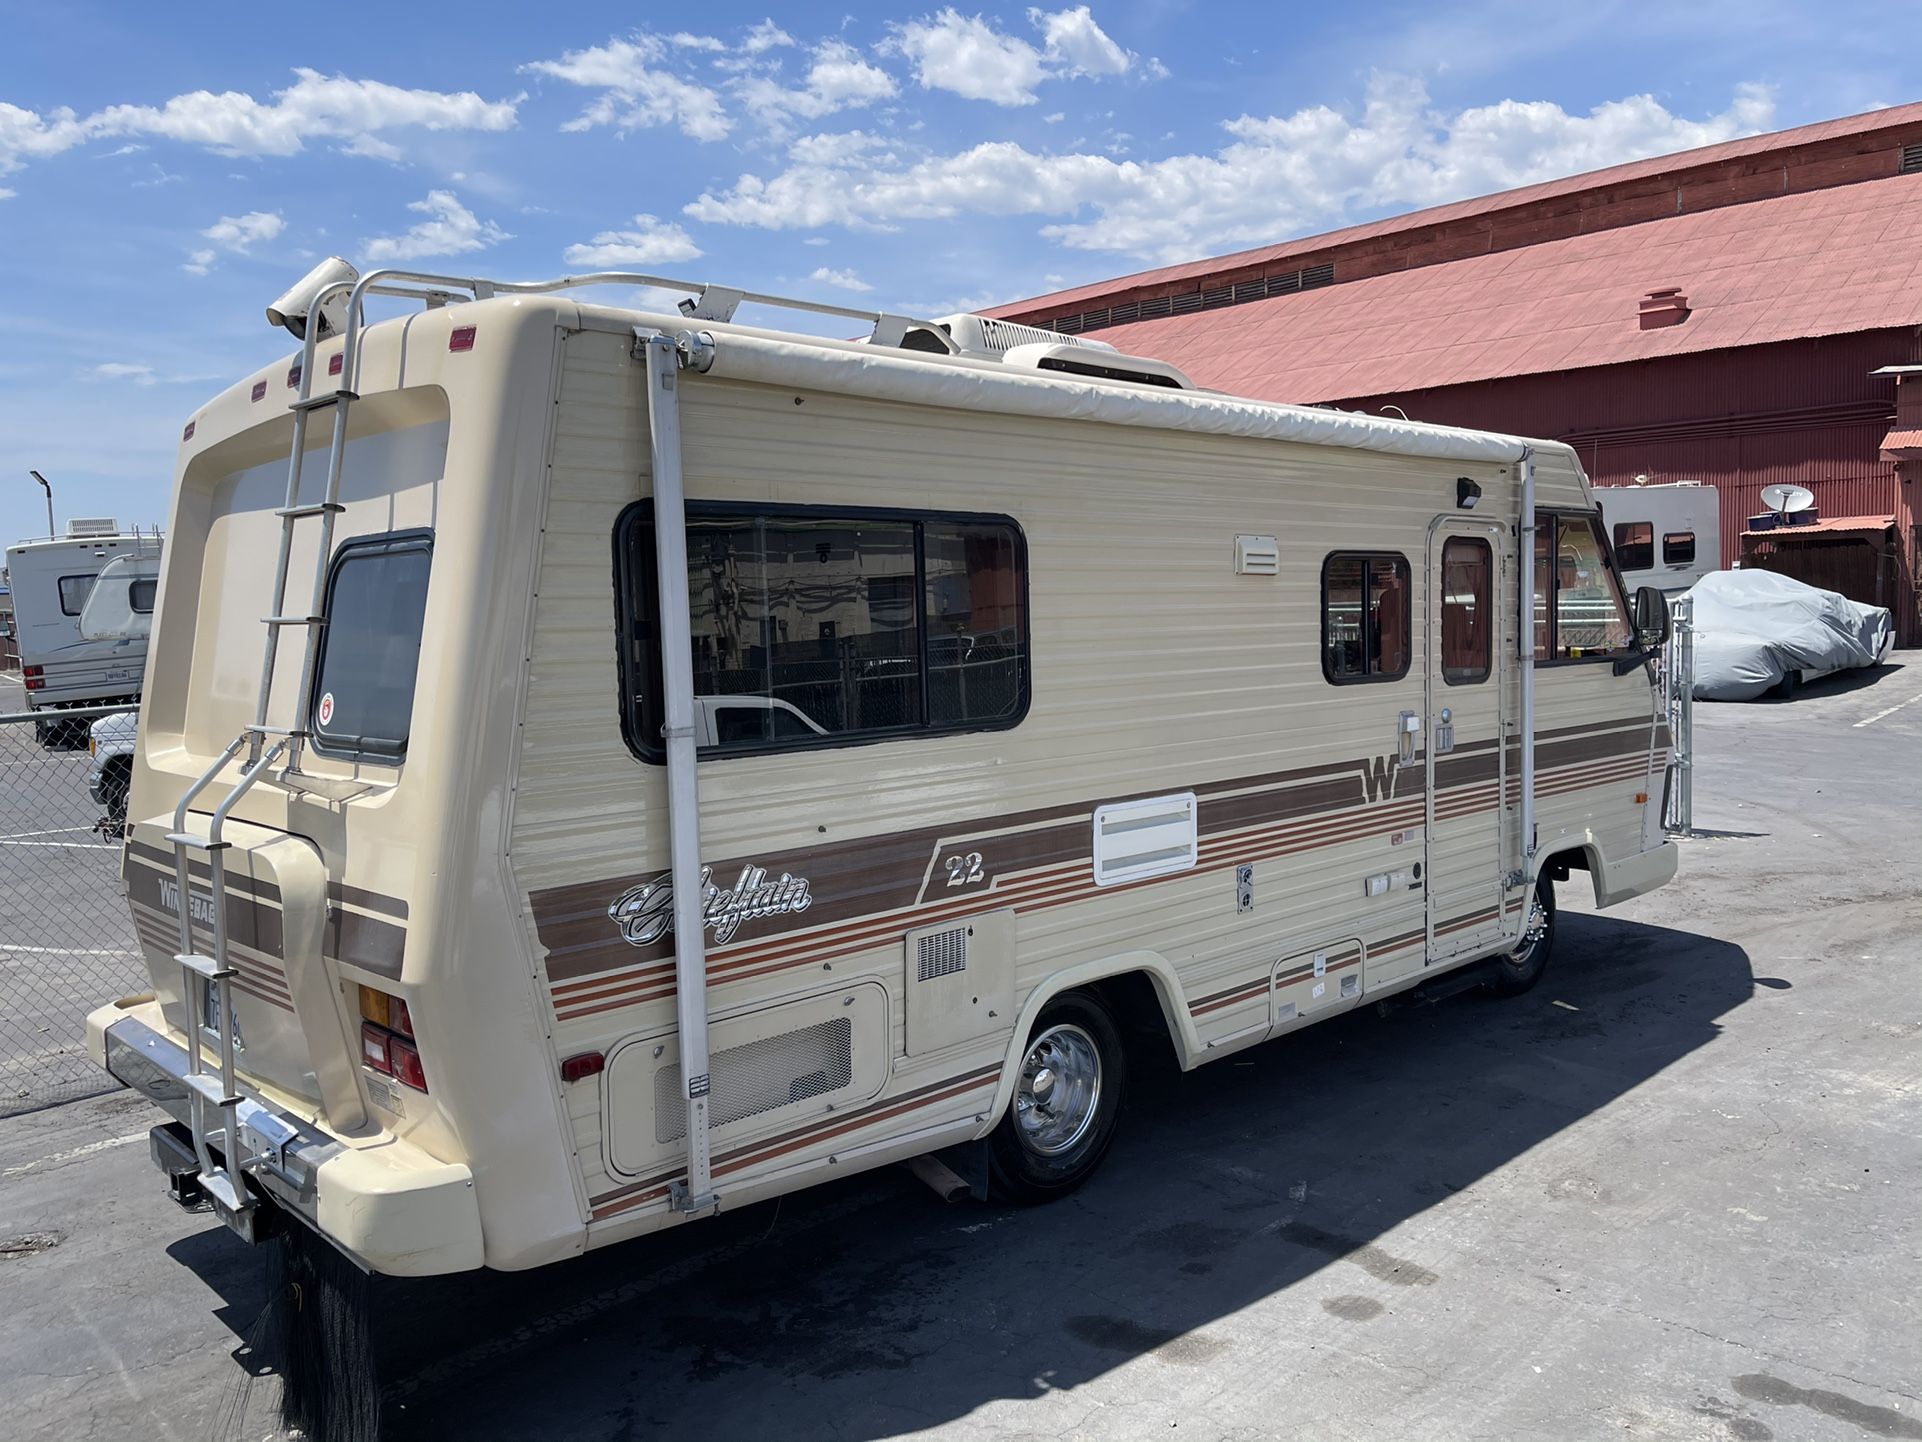 1987 Winnebago Chieftain 22FT A Class Model Only 42k Original Miles With Leveling Jacks Good Shape Must See